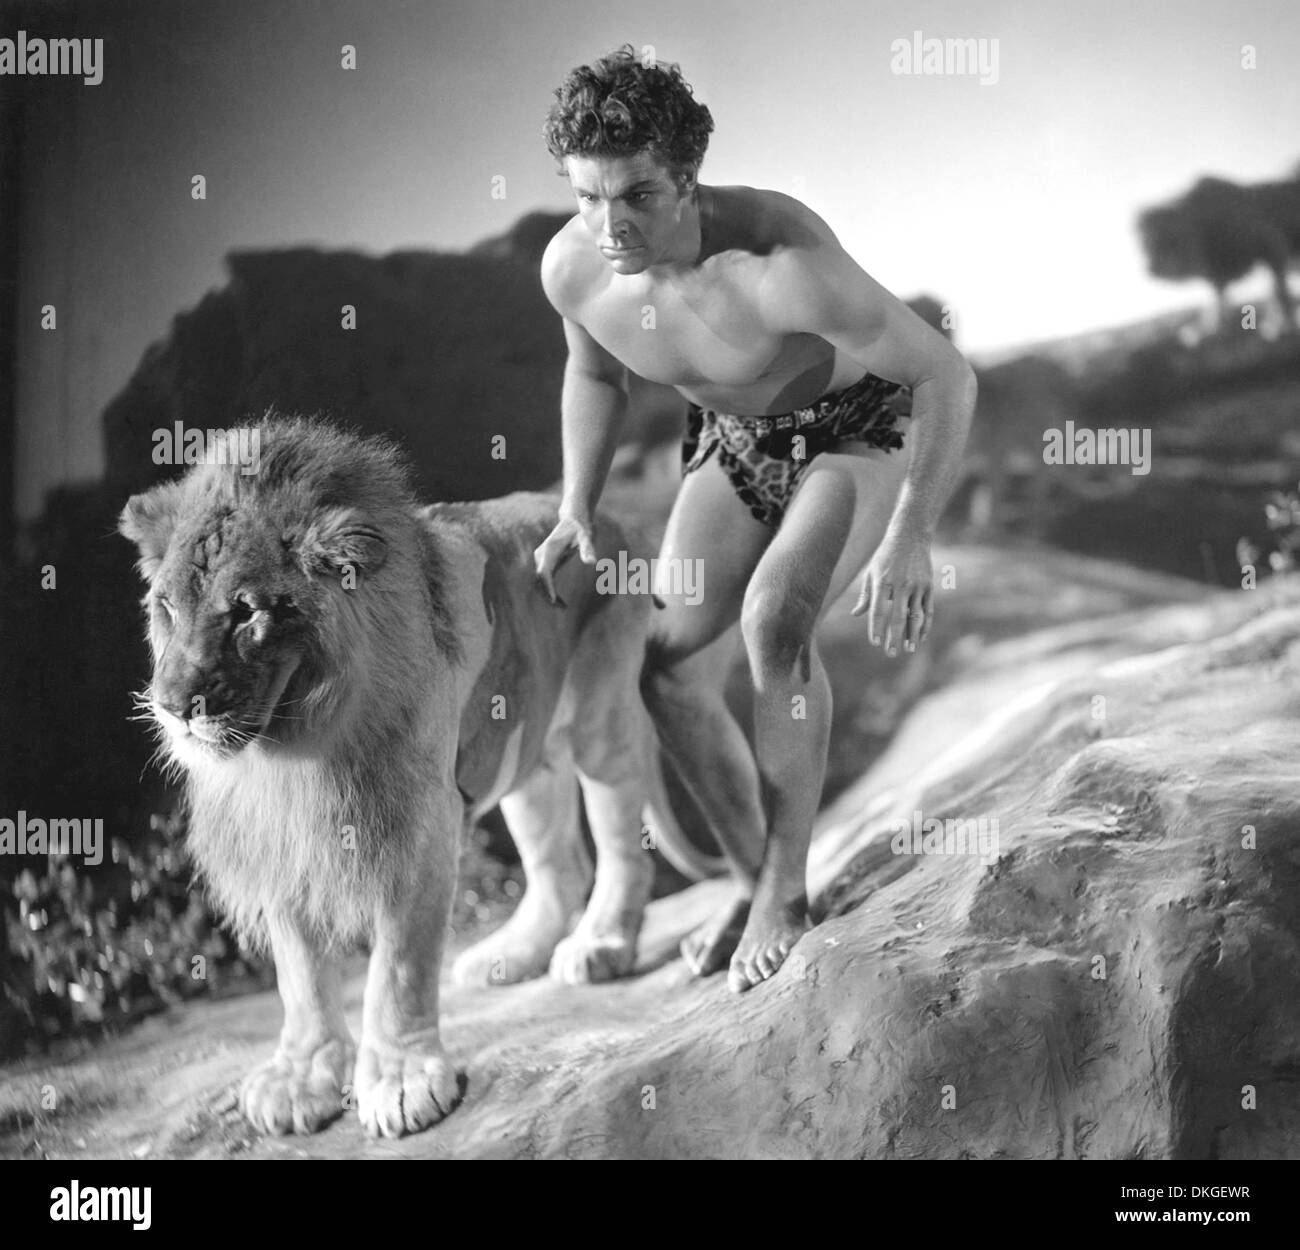 KING OF THE JUNGLE 1933 Paramount Pictures Film mit Buster Crabbe Stockfoto